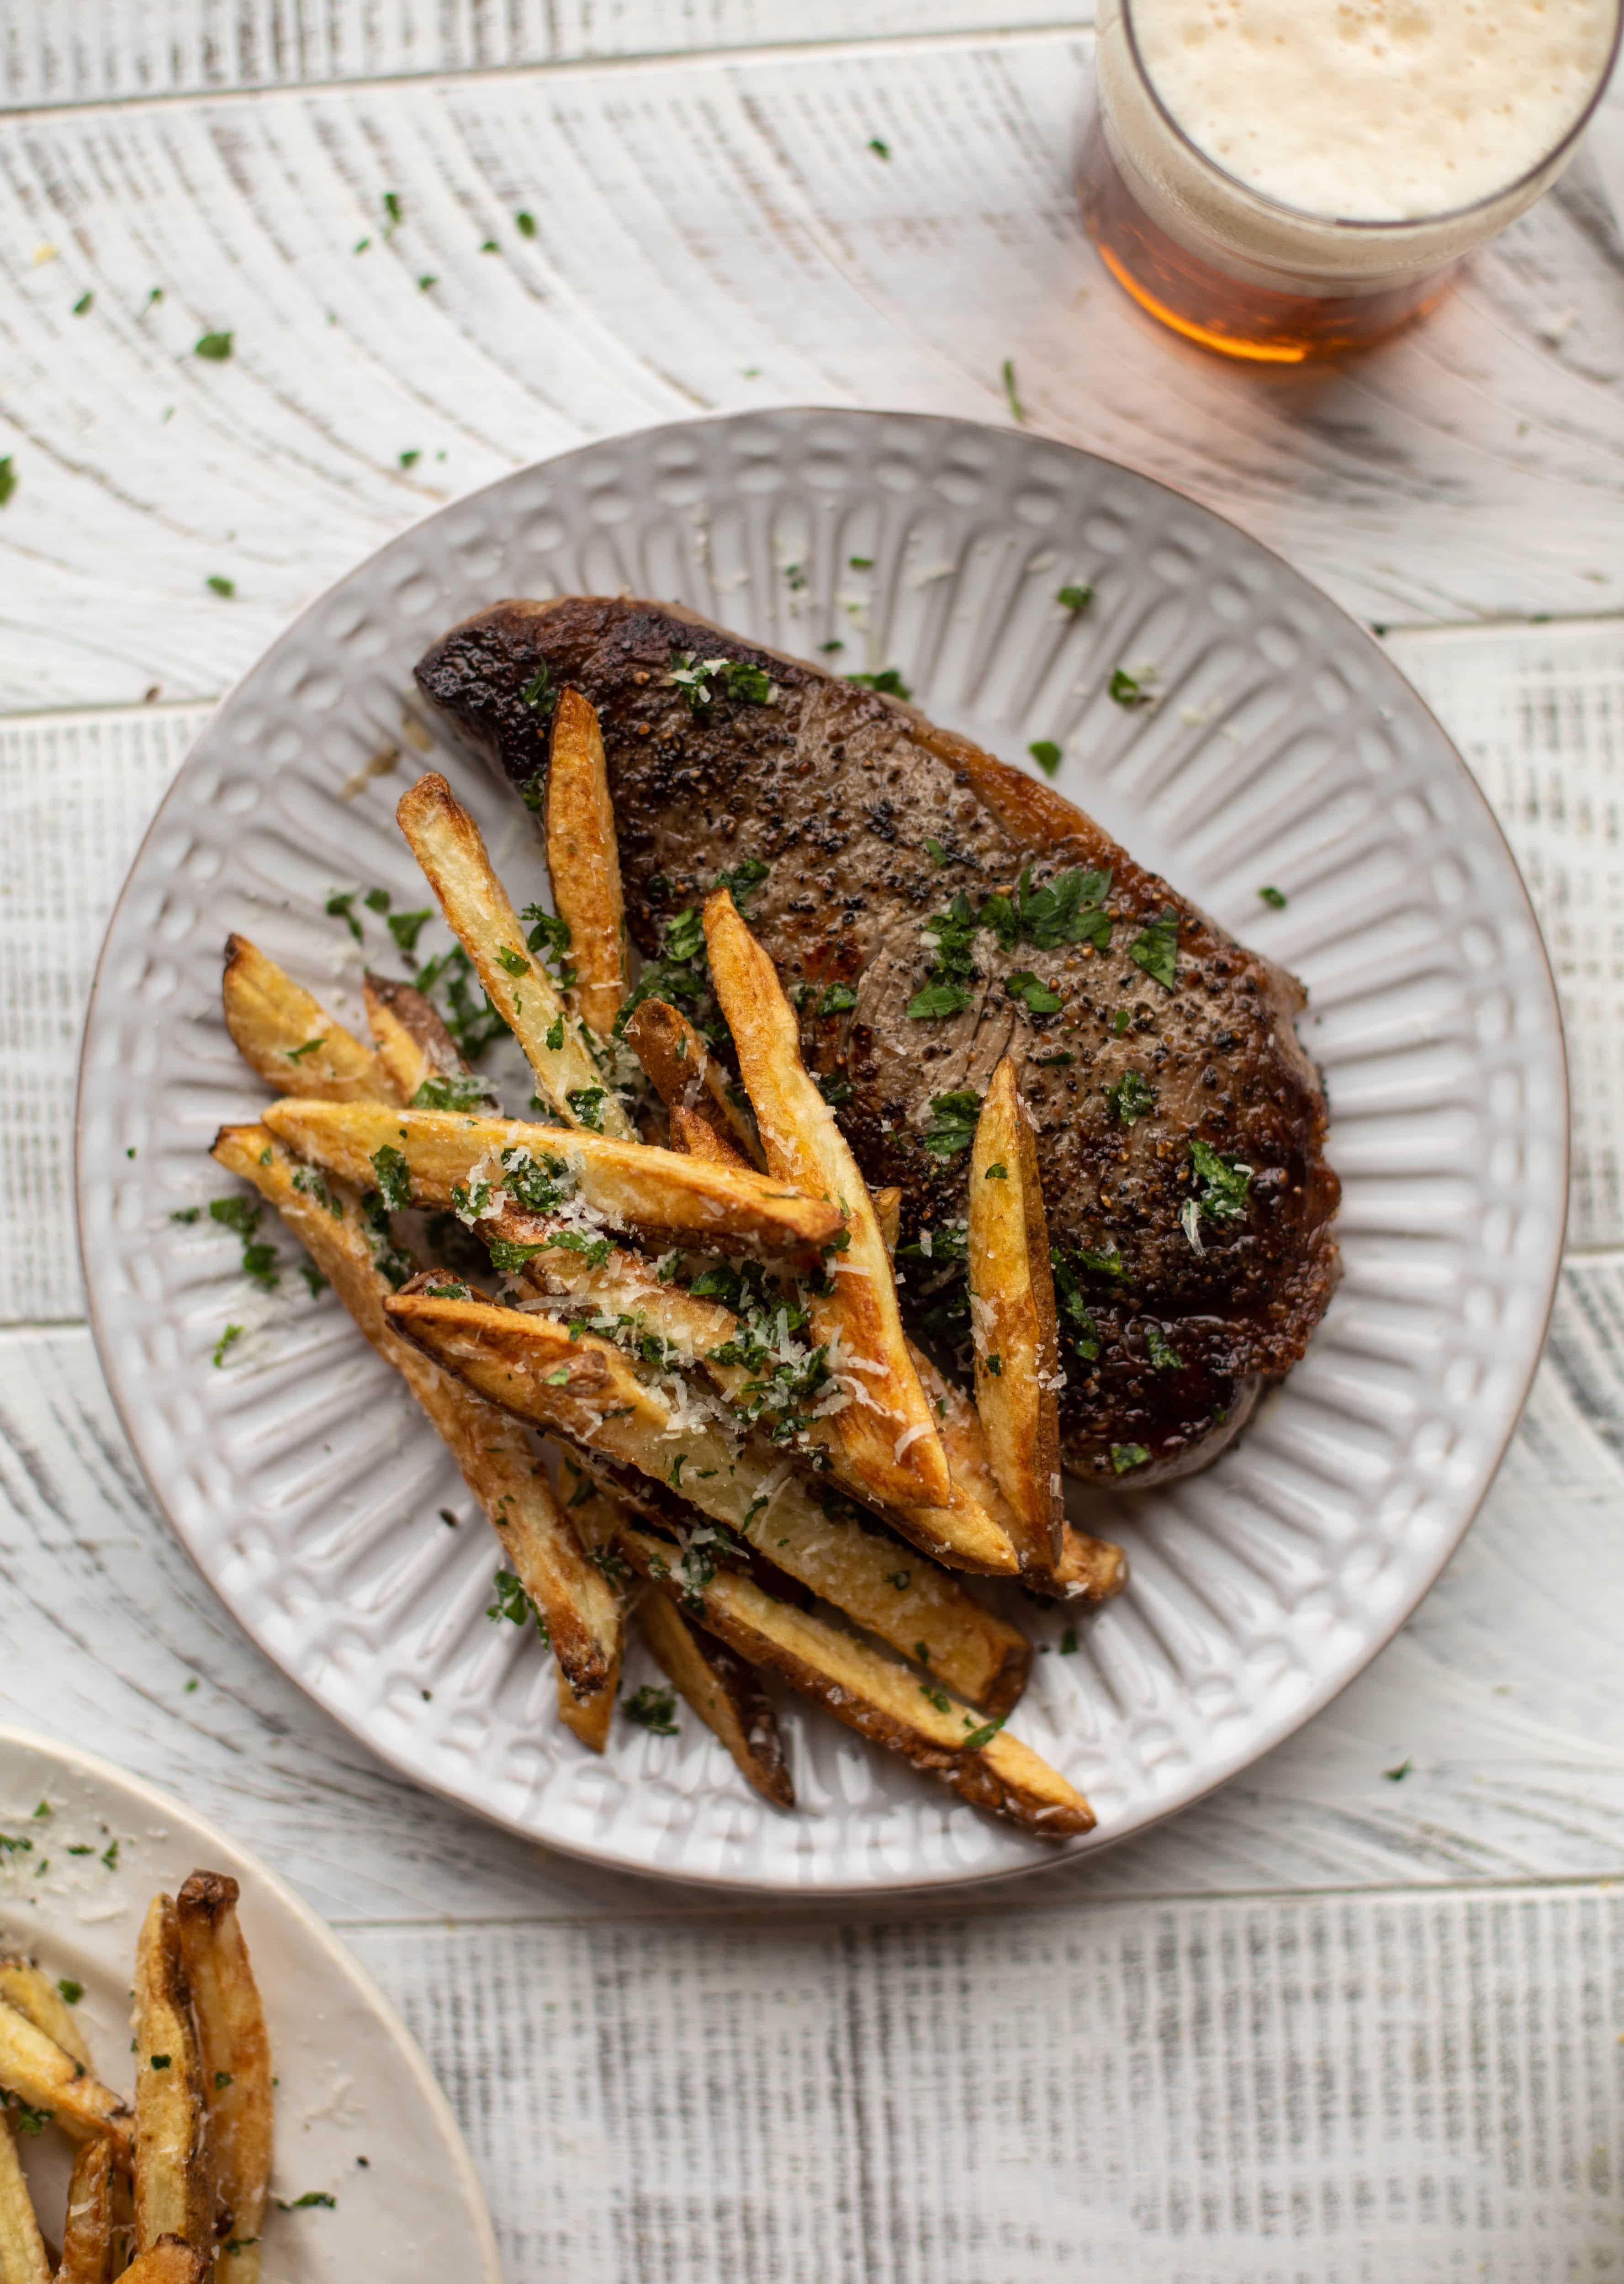 This is our favorite steak frites! Seared skillet steak and crispy fries made in the air fryer, topped with truffle salt, parmesan and herbs!